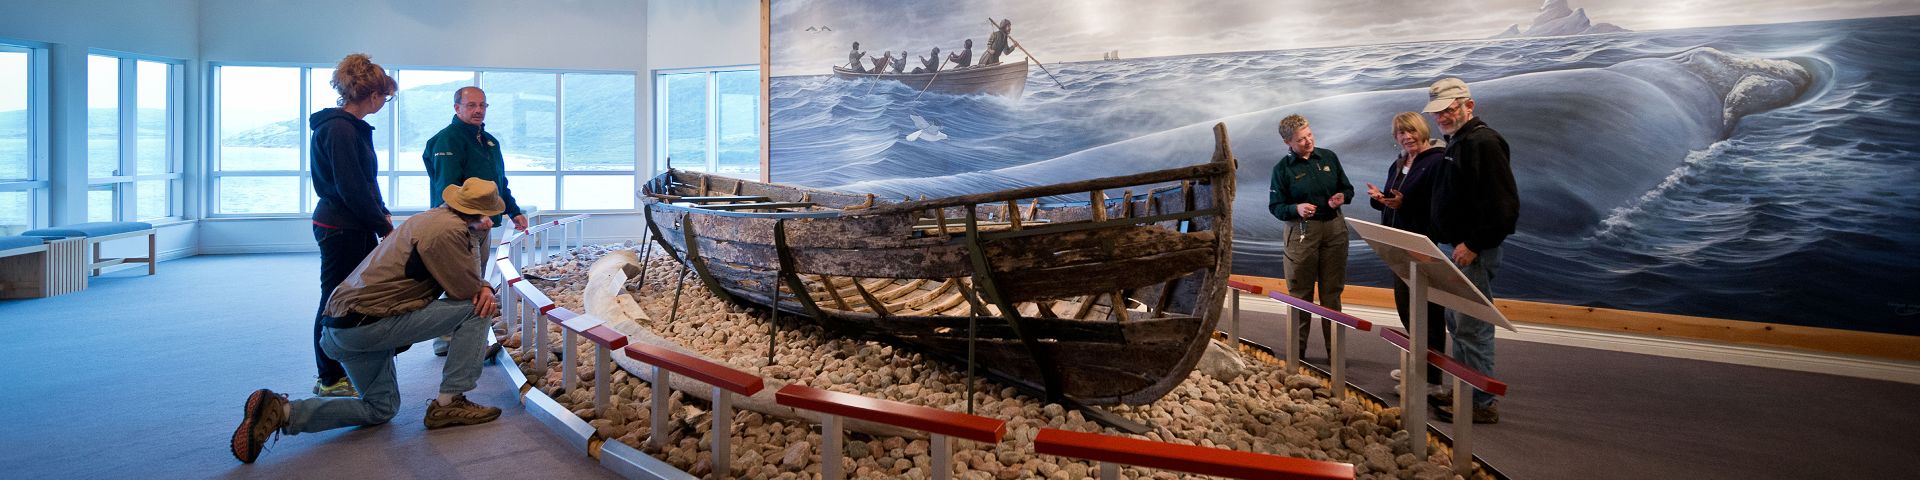 Parks Canada staff talk to a group of visitors next to a display of a Basque boat at Red Bay National Historic Site